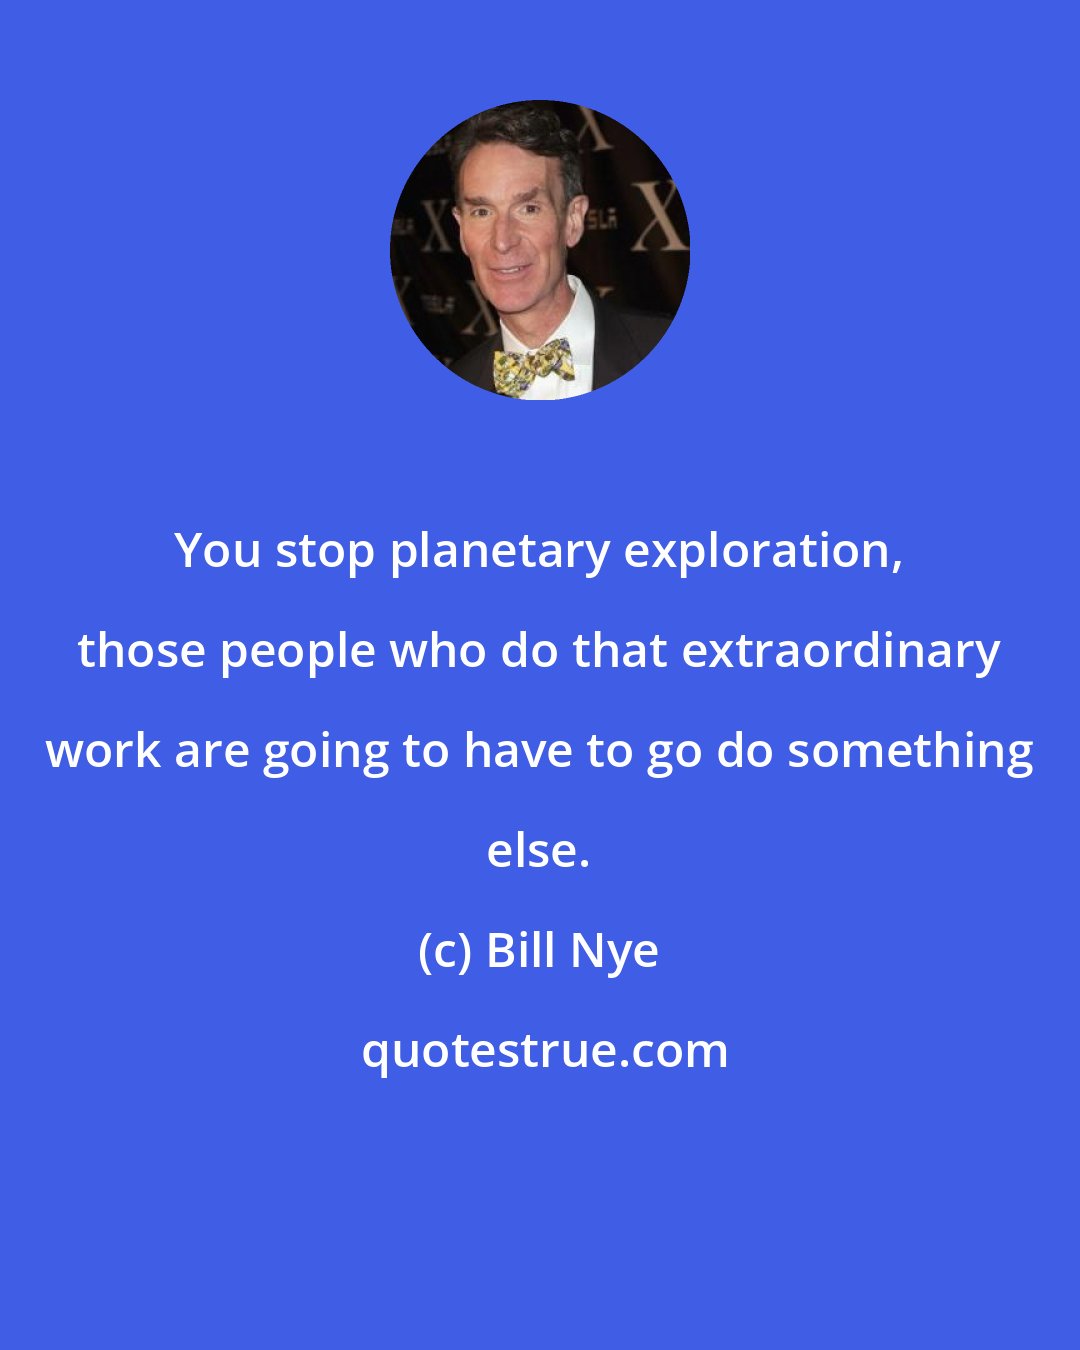 Bill Nye: You stop planetary exploration, those people who do that extraordinary work are going to have to go do something else.